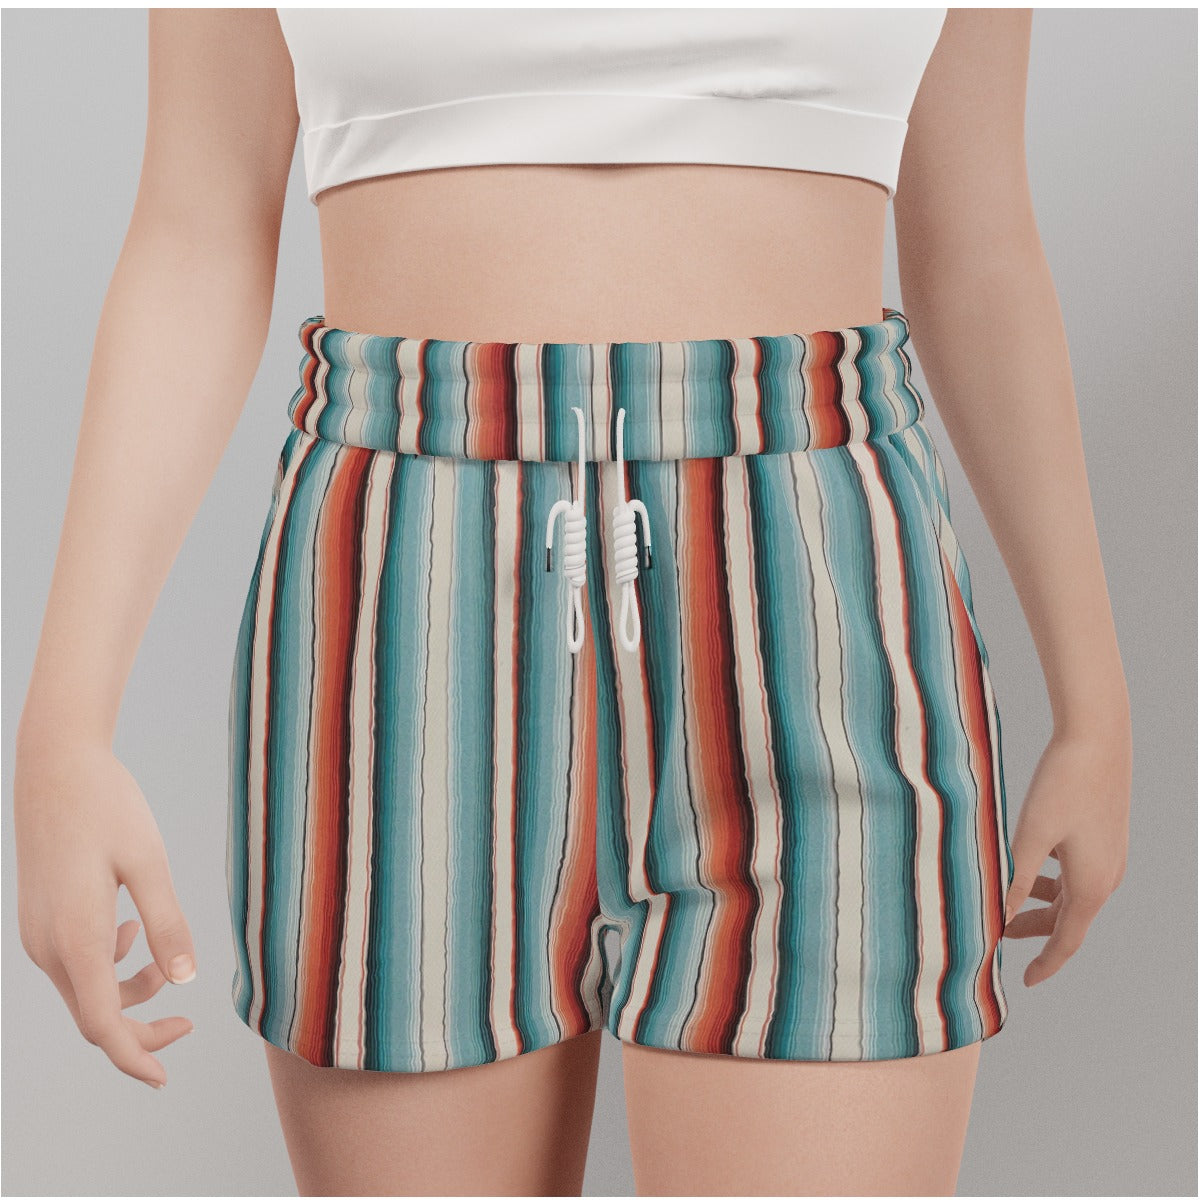 Turquoise & red serape Women's Casual Shorts